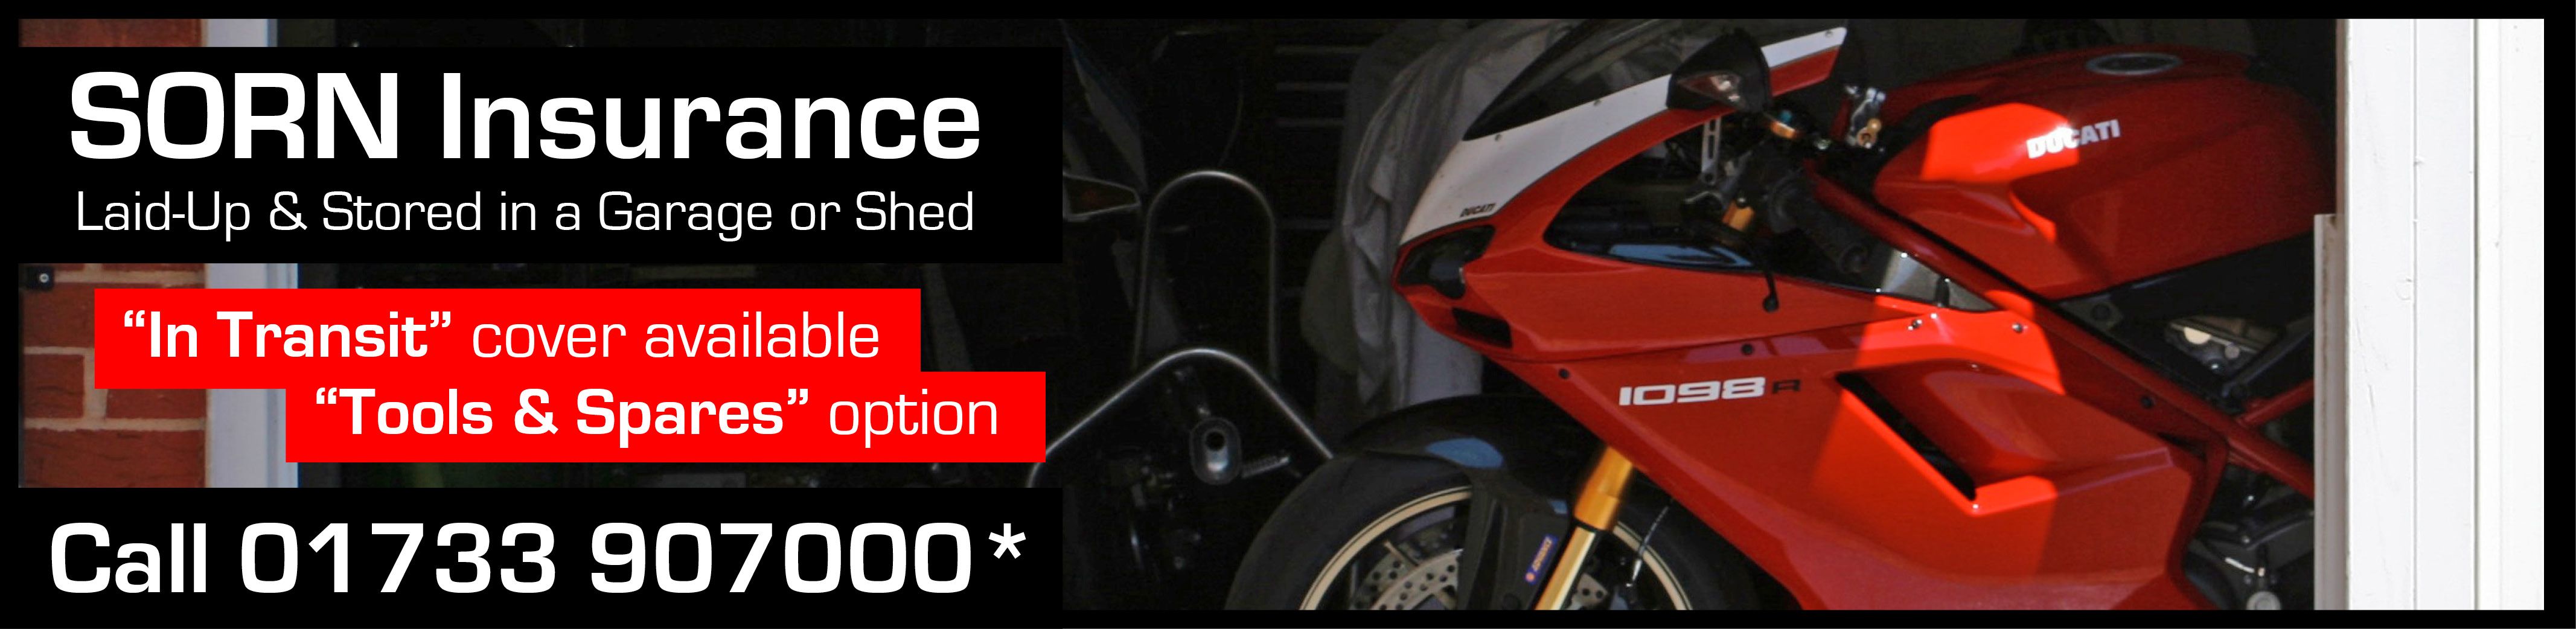 SORN Motorcycle Insurance